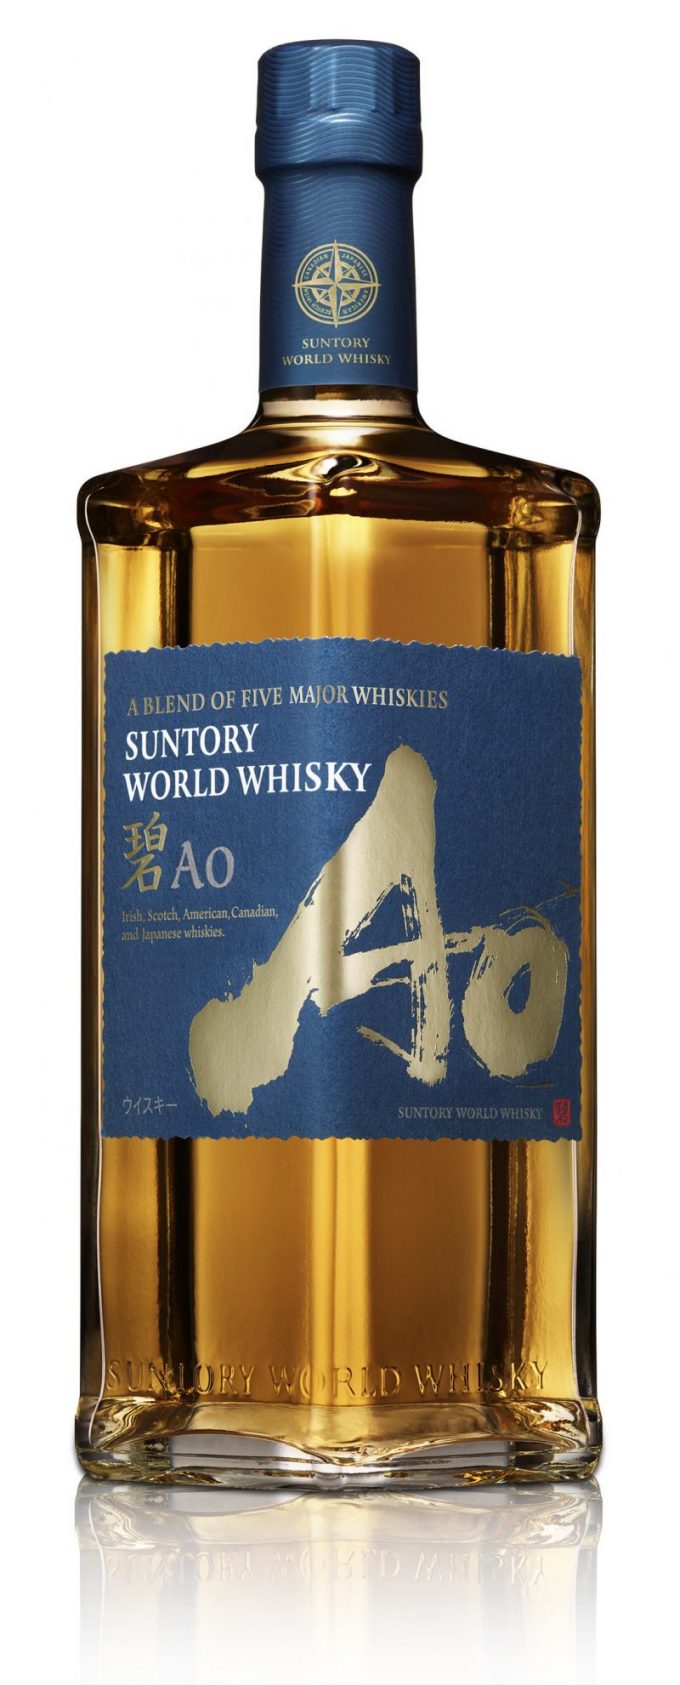 Ao – the first-ever World Blended Whisky launches exclusively in duty-free